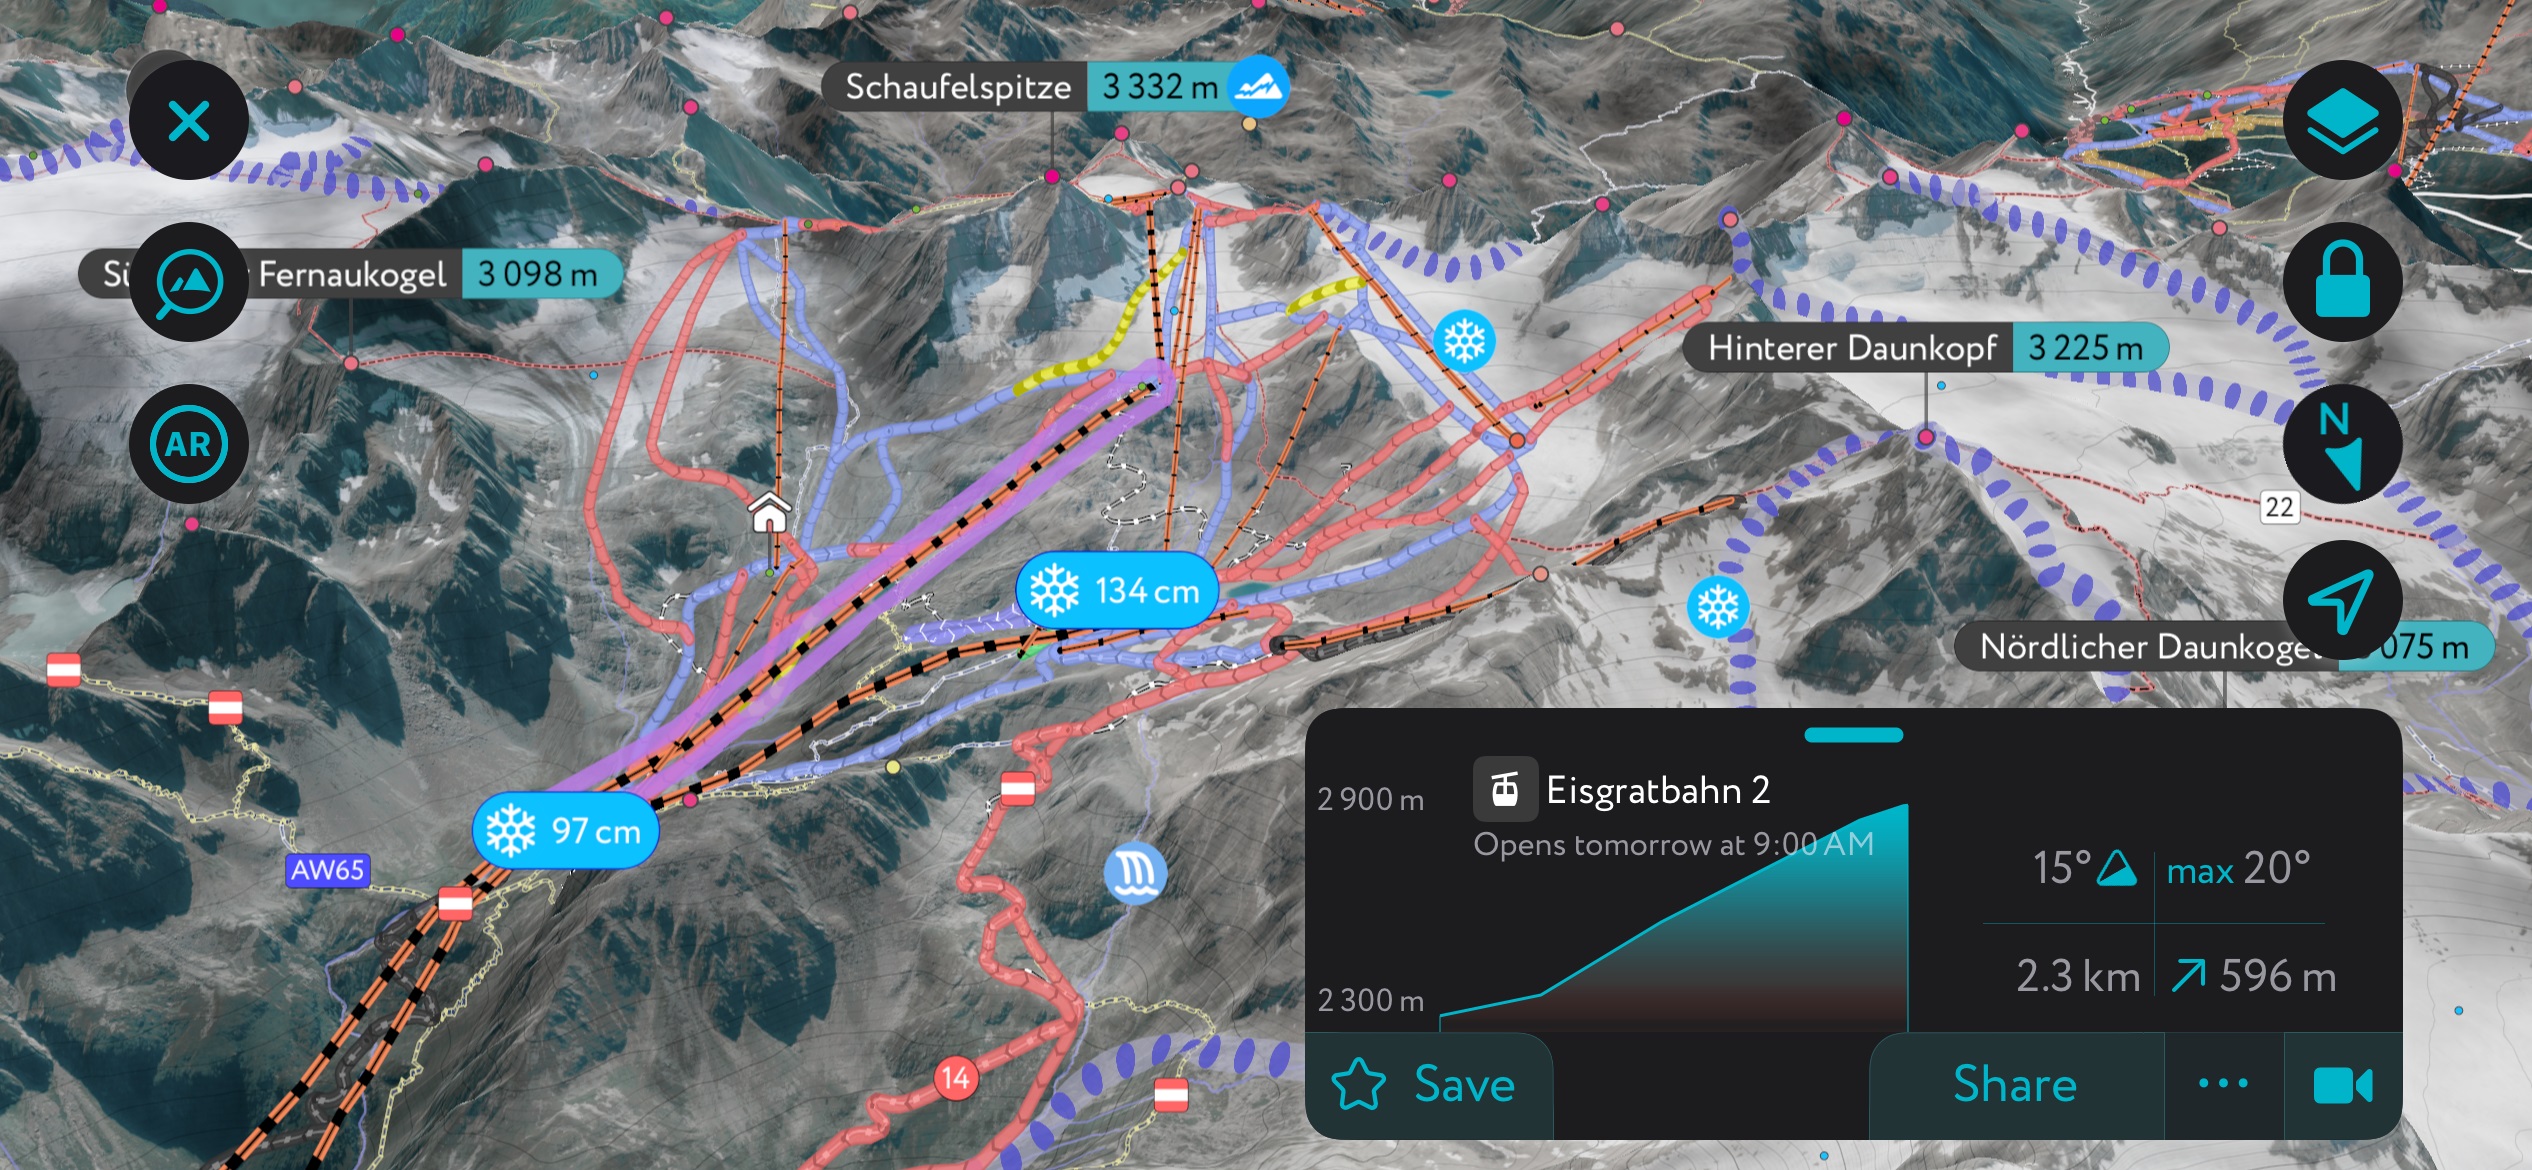 The Stubai Glacier Ski Resort on PeakVisor’s mobile app. Forget those cartoon maps provided by the resorts; it’s difficult to glean information about the mountains. Our interactive 3D Maps show pistes and even lift opening times; it’s the best way to get a mental understanding of the mountain. Moreover, you can scope out the terrain for off-piste skiing. Stubai Alps